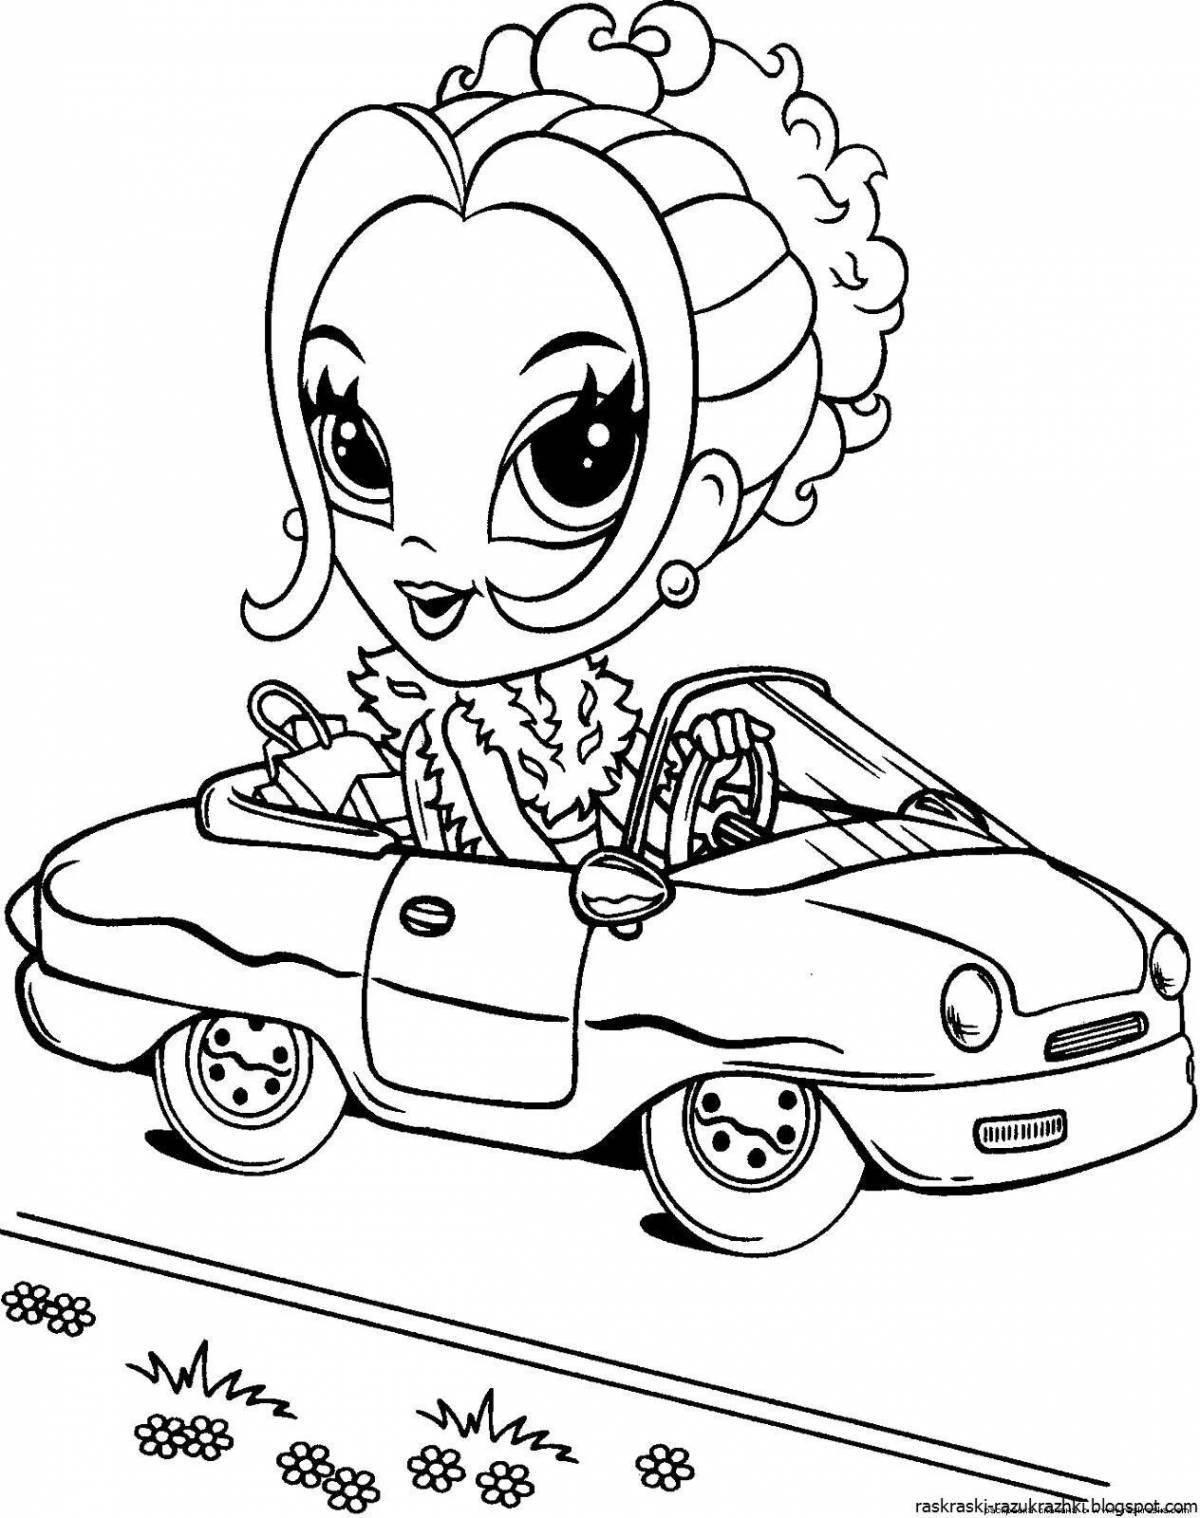 Color-frenzy coloring page game for girls 9-10 years old